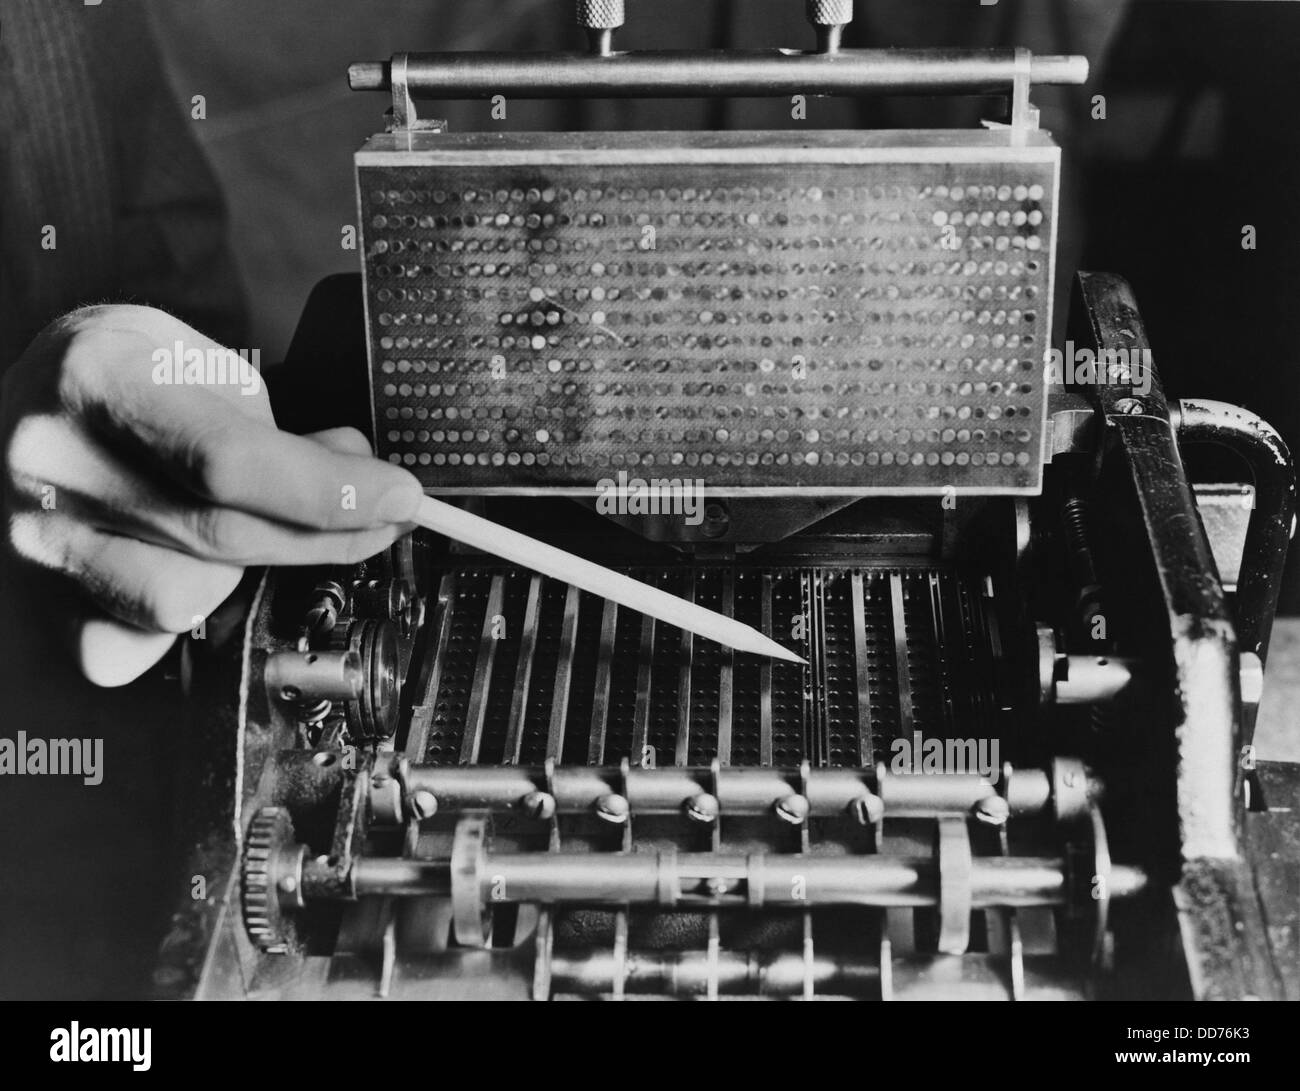 U.S. Bureau of the Census computer operator pointing out the interior mechanism of the punched card sorter, ca. 1940. Stock Photo